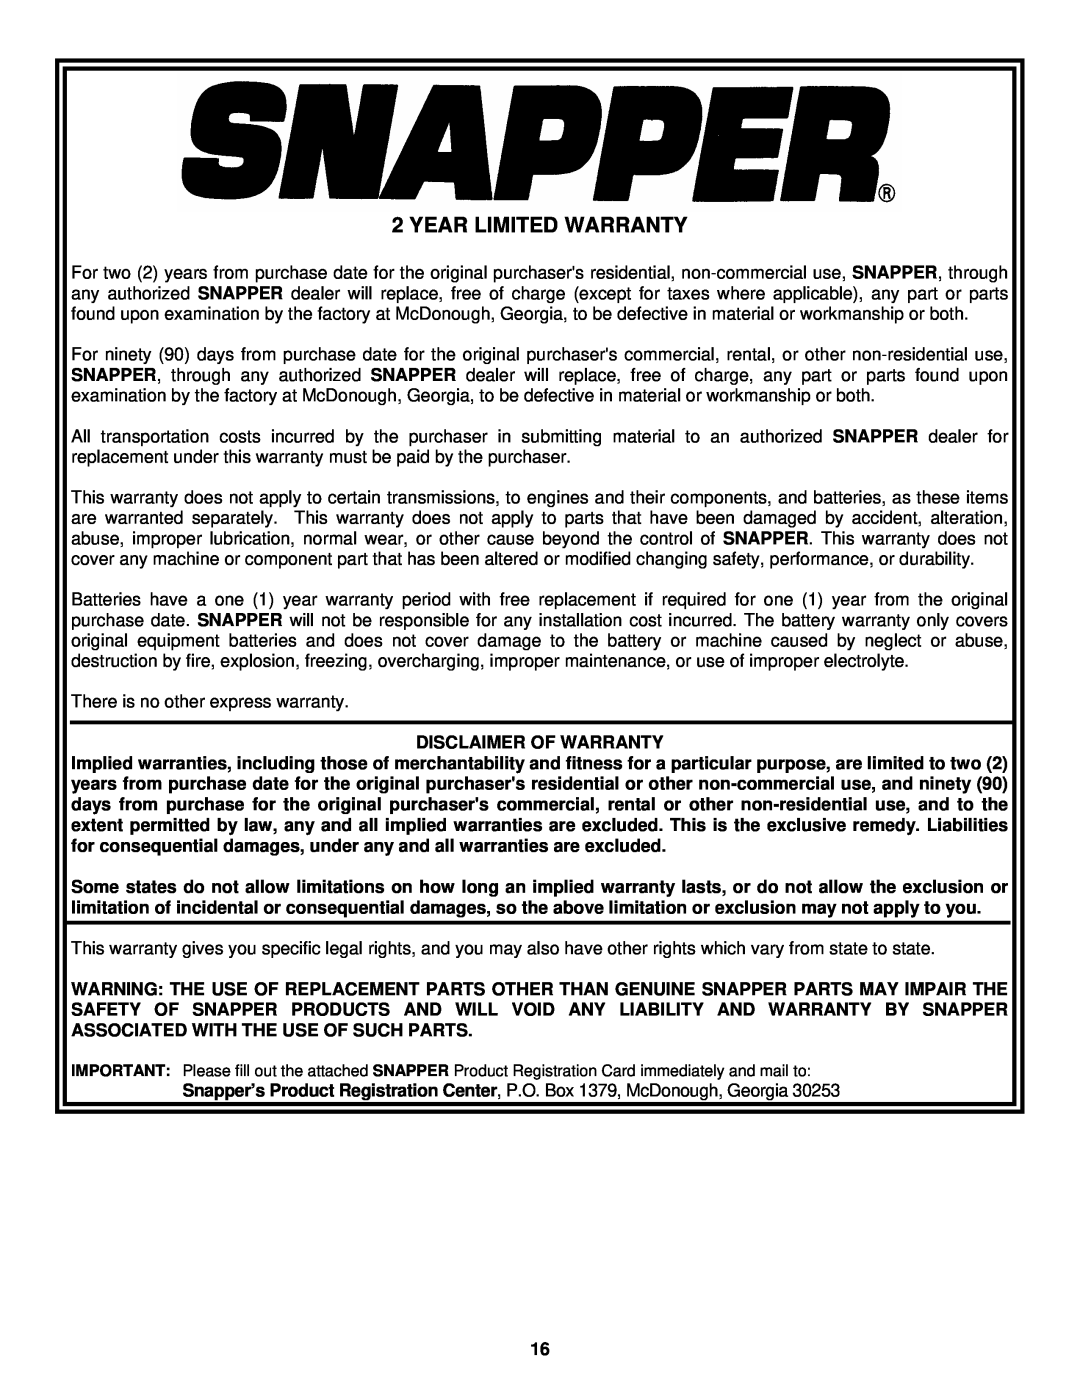 Snapper LE3171R, LE3191R, LE3191E important safety instructions Year Limited Warranty 